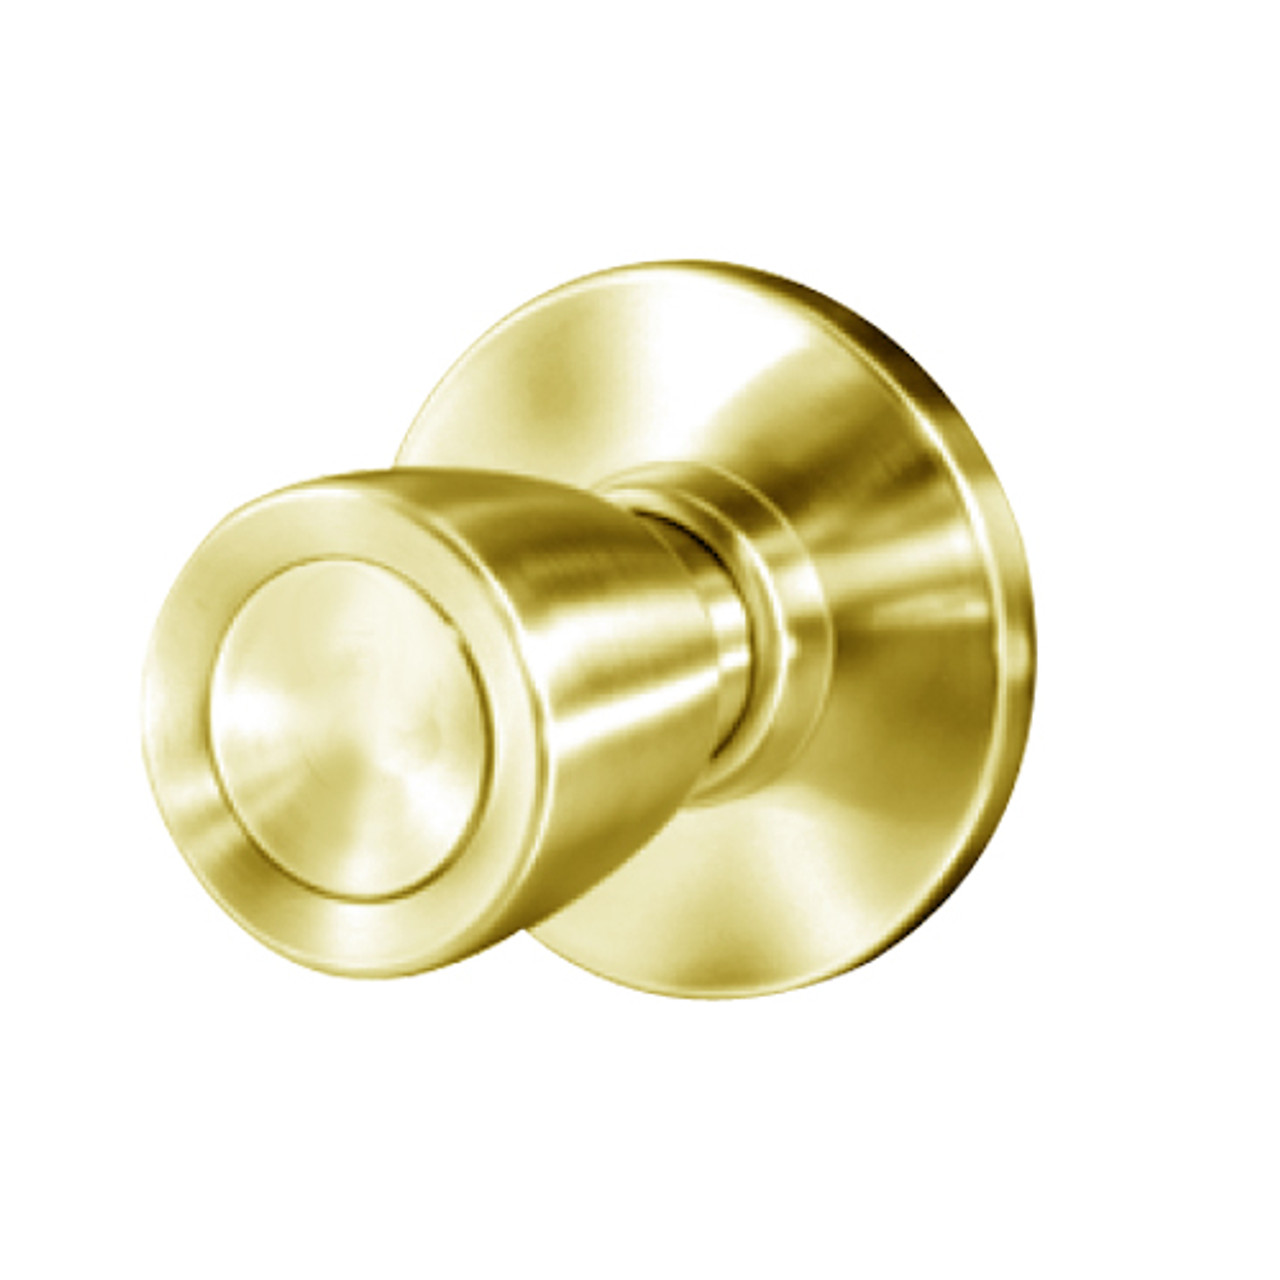 8K30M6AS3605 Best 8K Series Communicating Heavy Duty Cylindrical Knob Locks with Tulip Style in Bright Brass